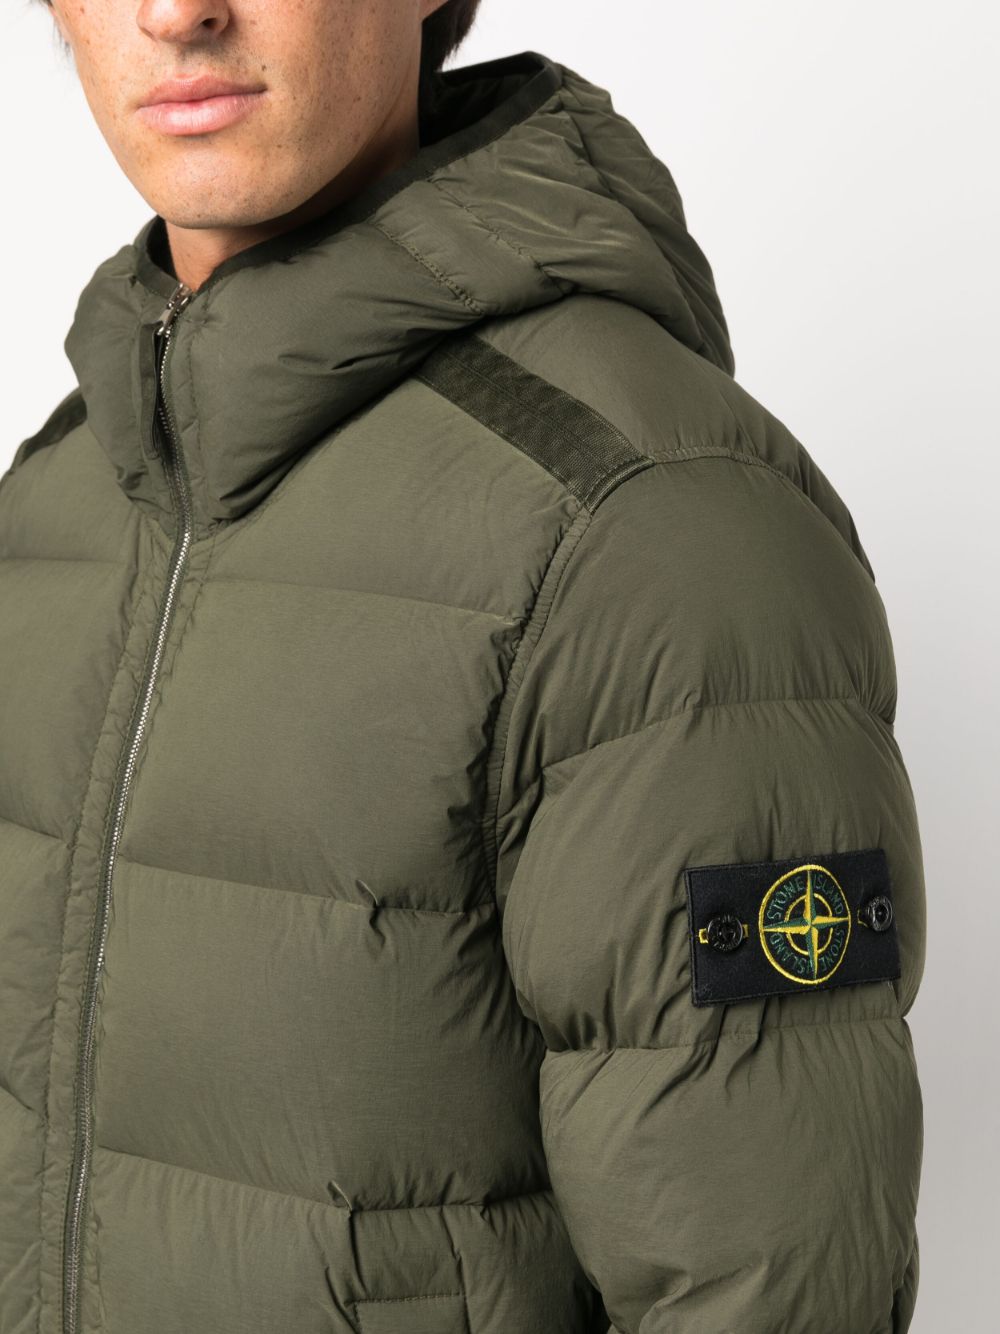 Stone Island Doudoune Olive 44028 SEAMLESS TUNNEL - Lothaire